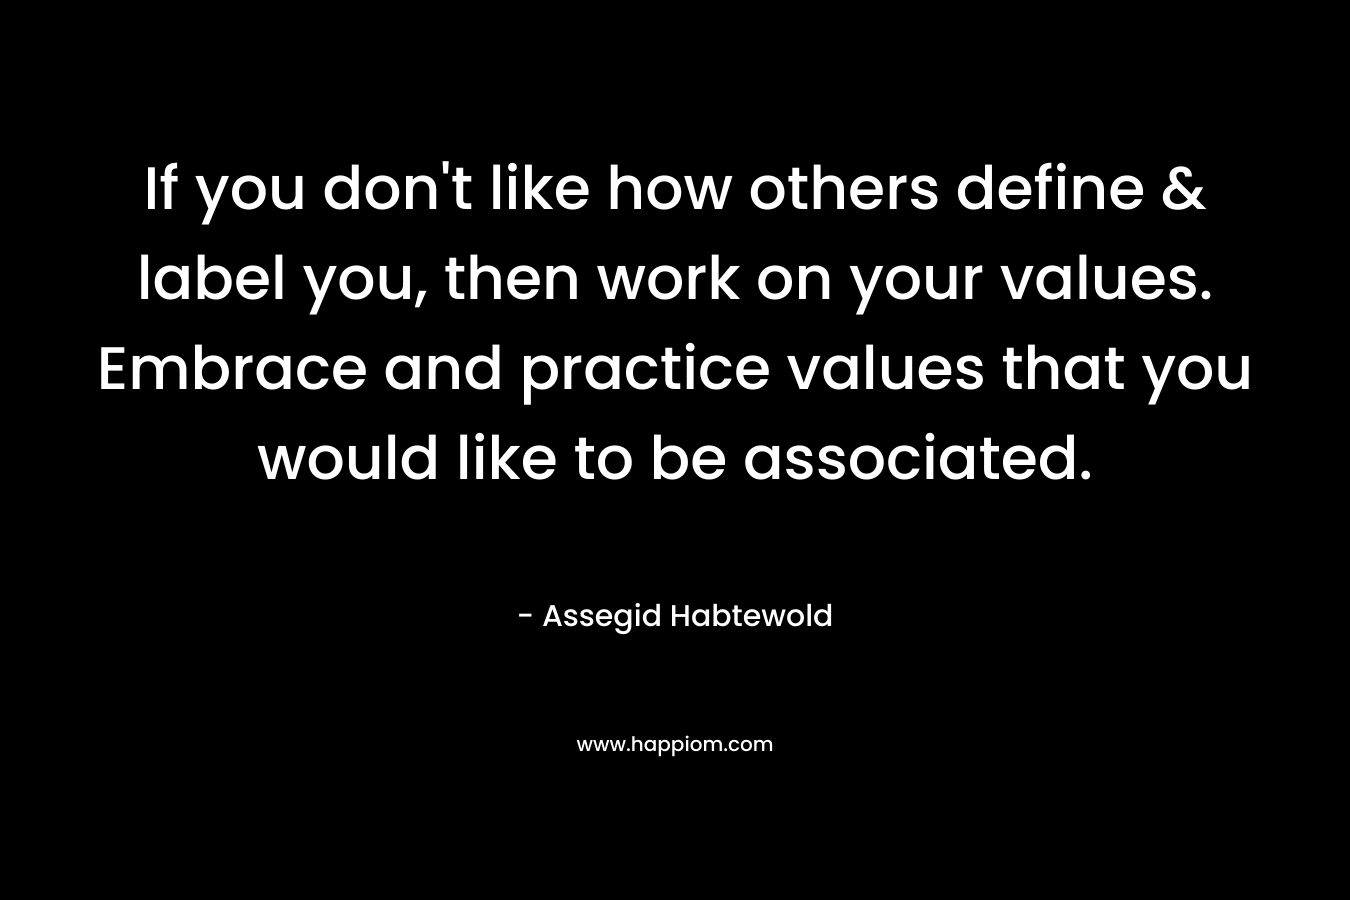 If you don’t like how others define & label you, then work on your values. Embrace and practice values that you would like to be associated. – Assegid Habtewold